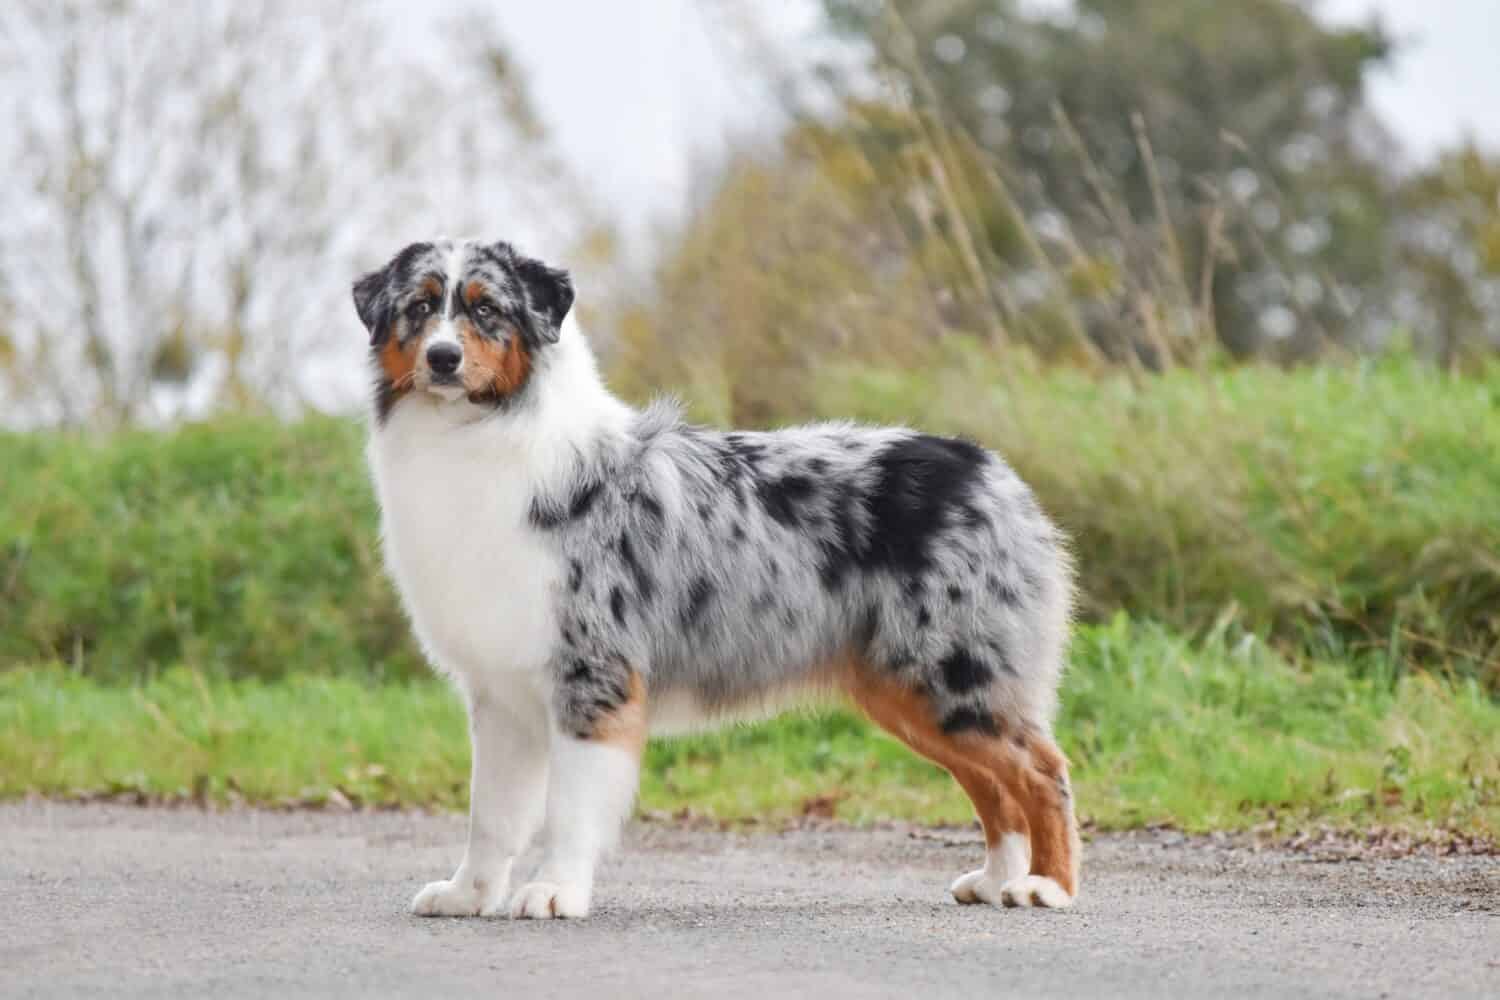 The dog australian shepherd stands sideways in full growth and looking at the camera